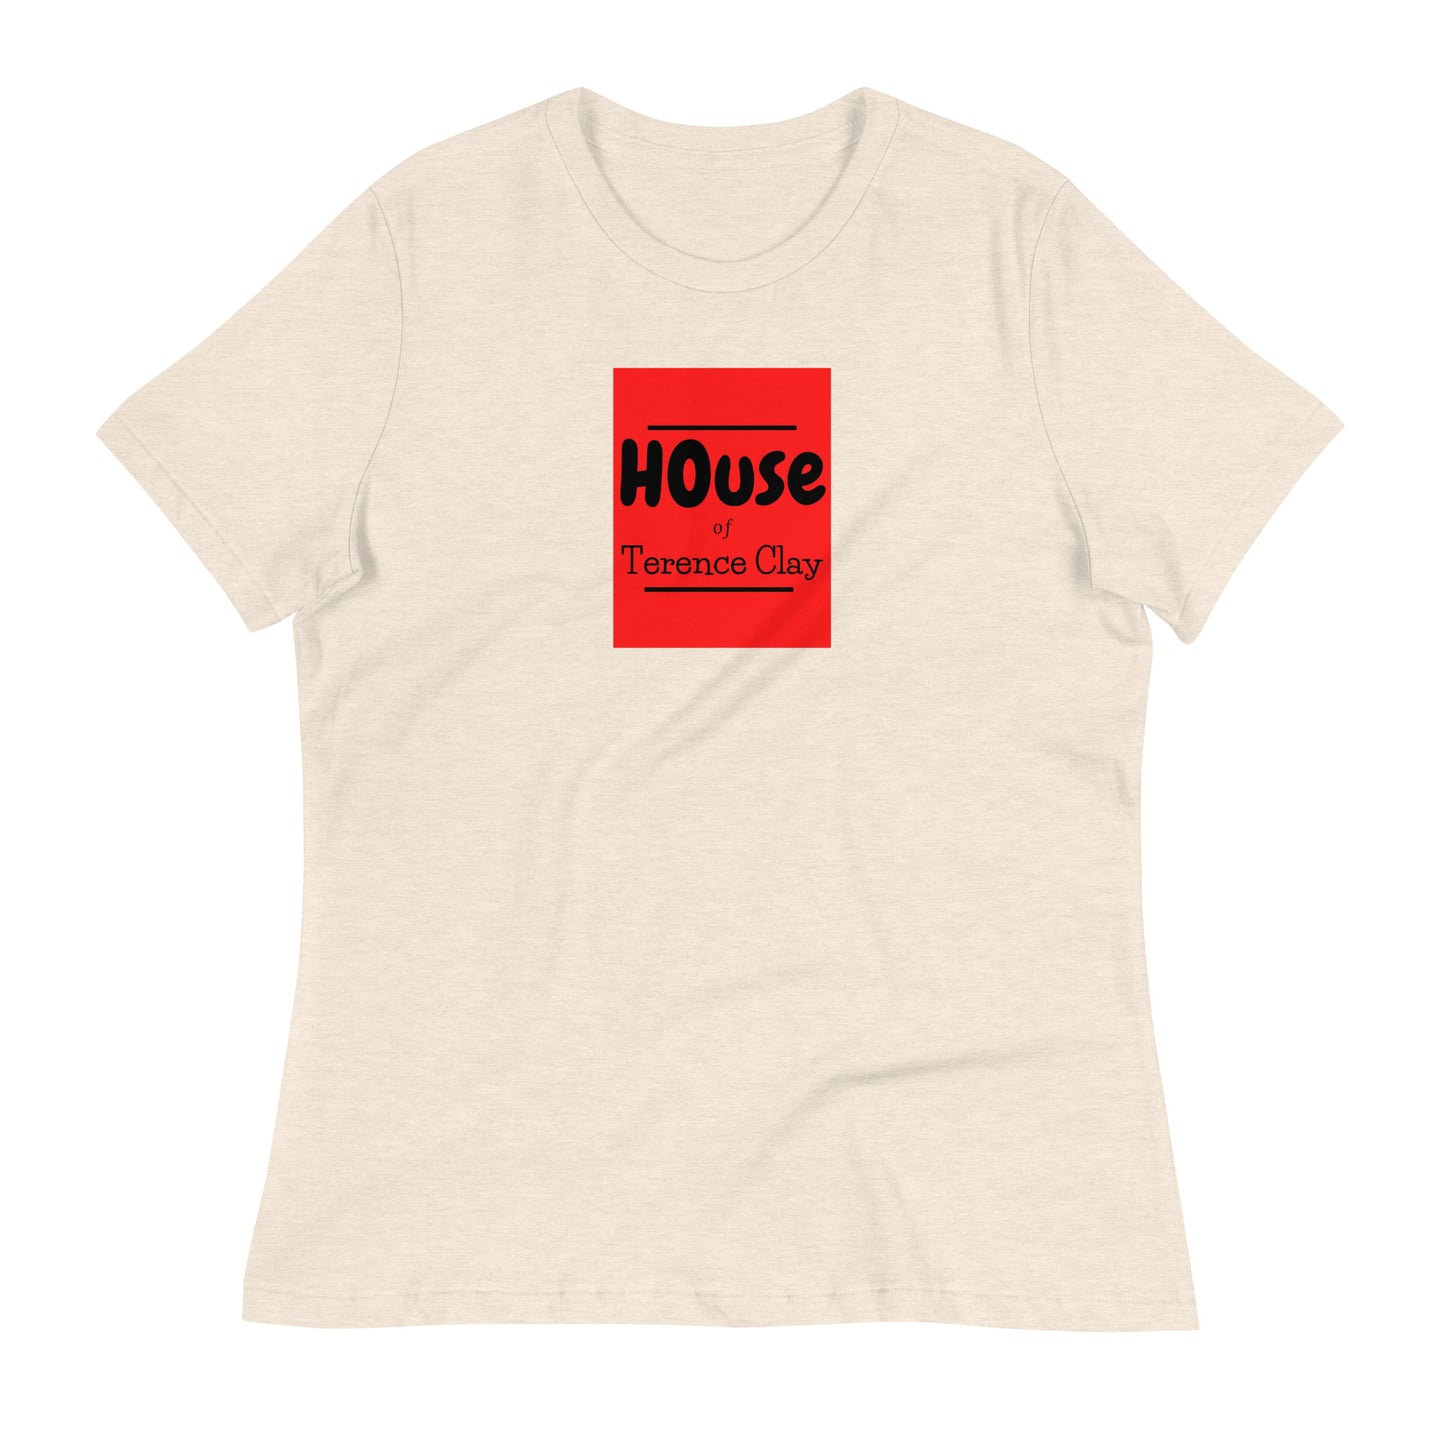 "HOUSE of Terence Clay large red-box Retro Look" Women's Relaxed Shirt